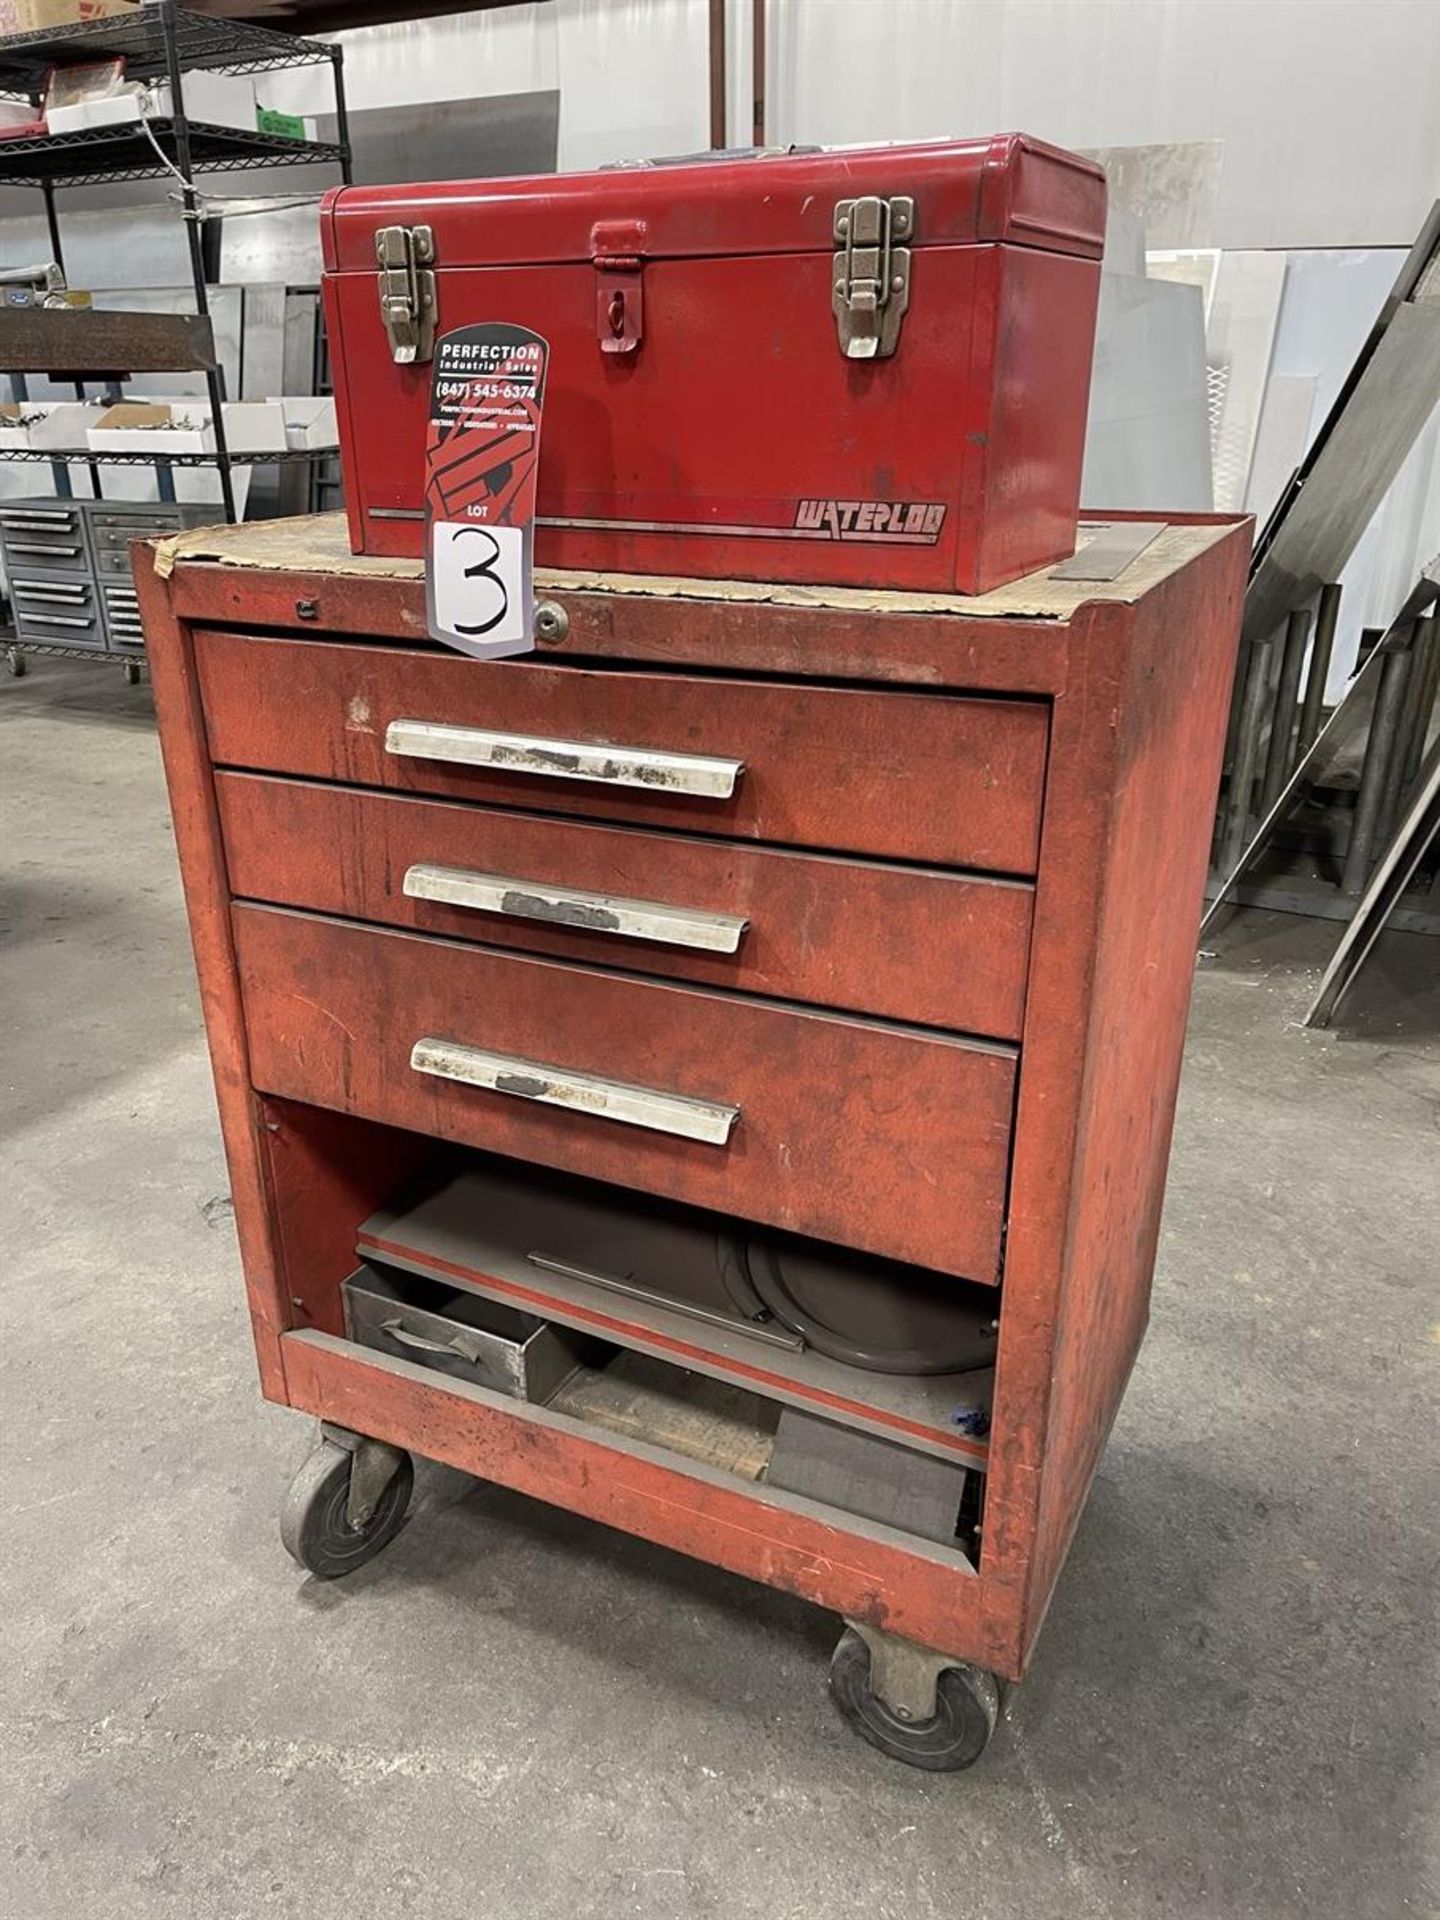 Rolling Tool Chest w/ Waterloo Tool Box